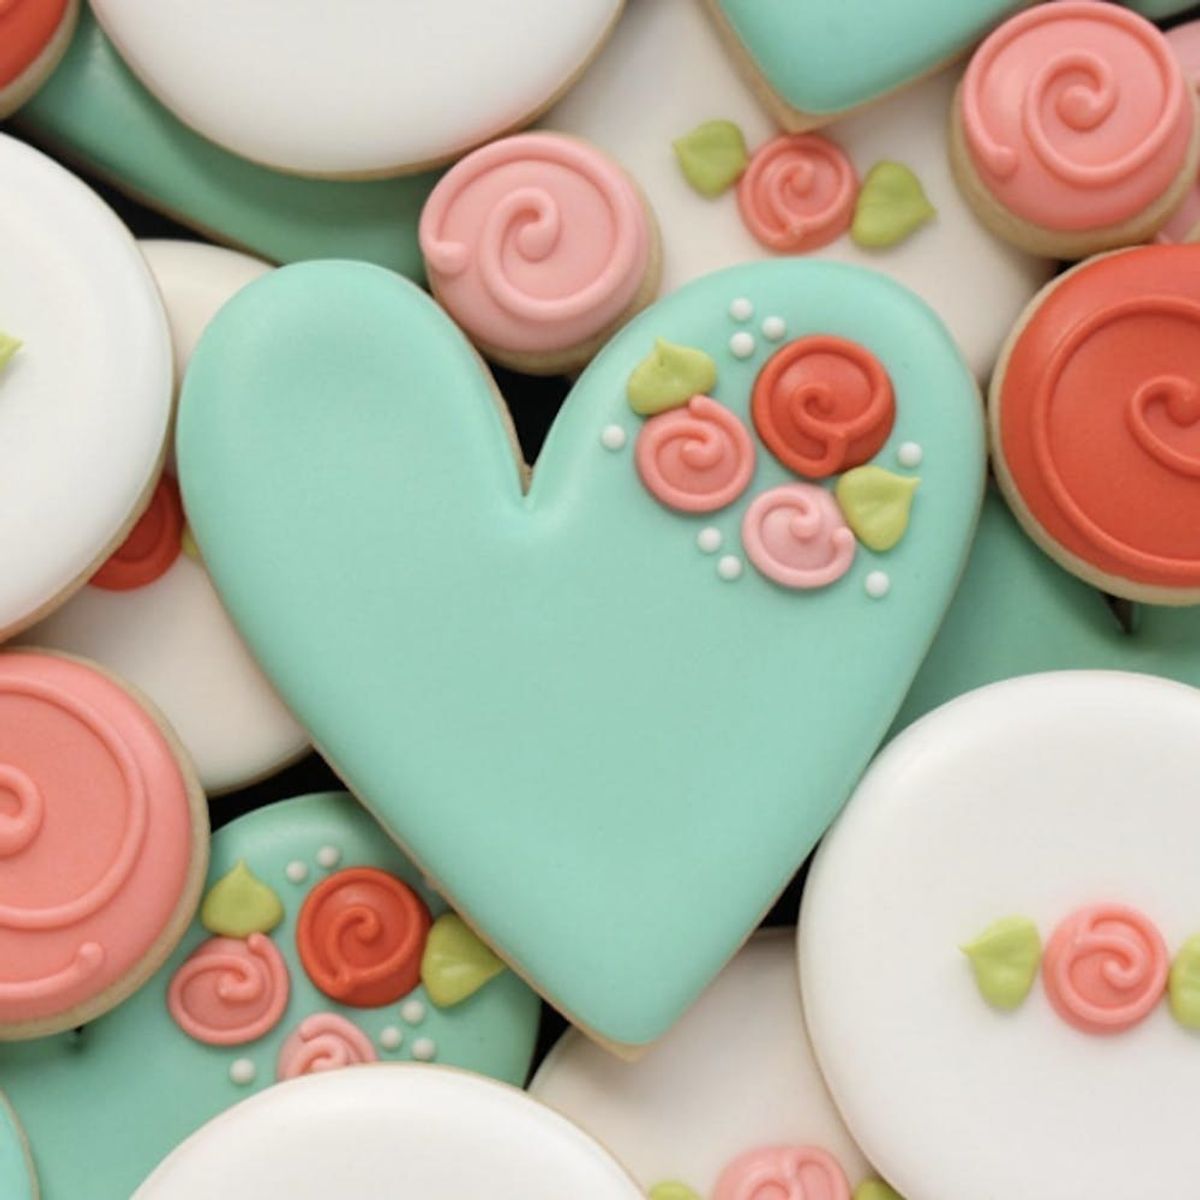 10 Heart-Shaped Desserts from the Most Popular Bakers on Instagram